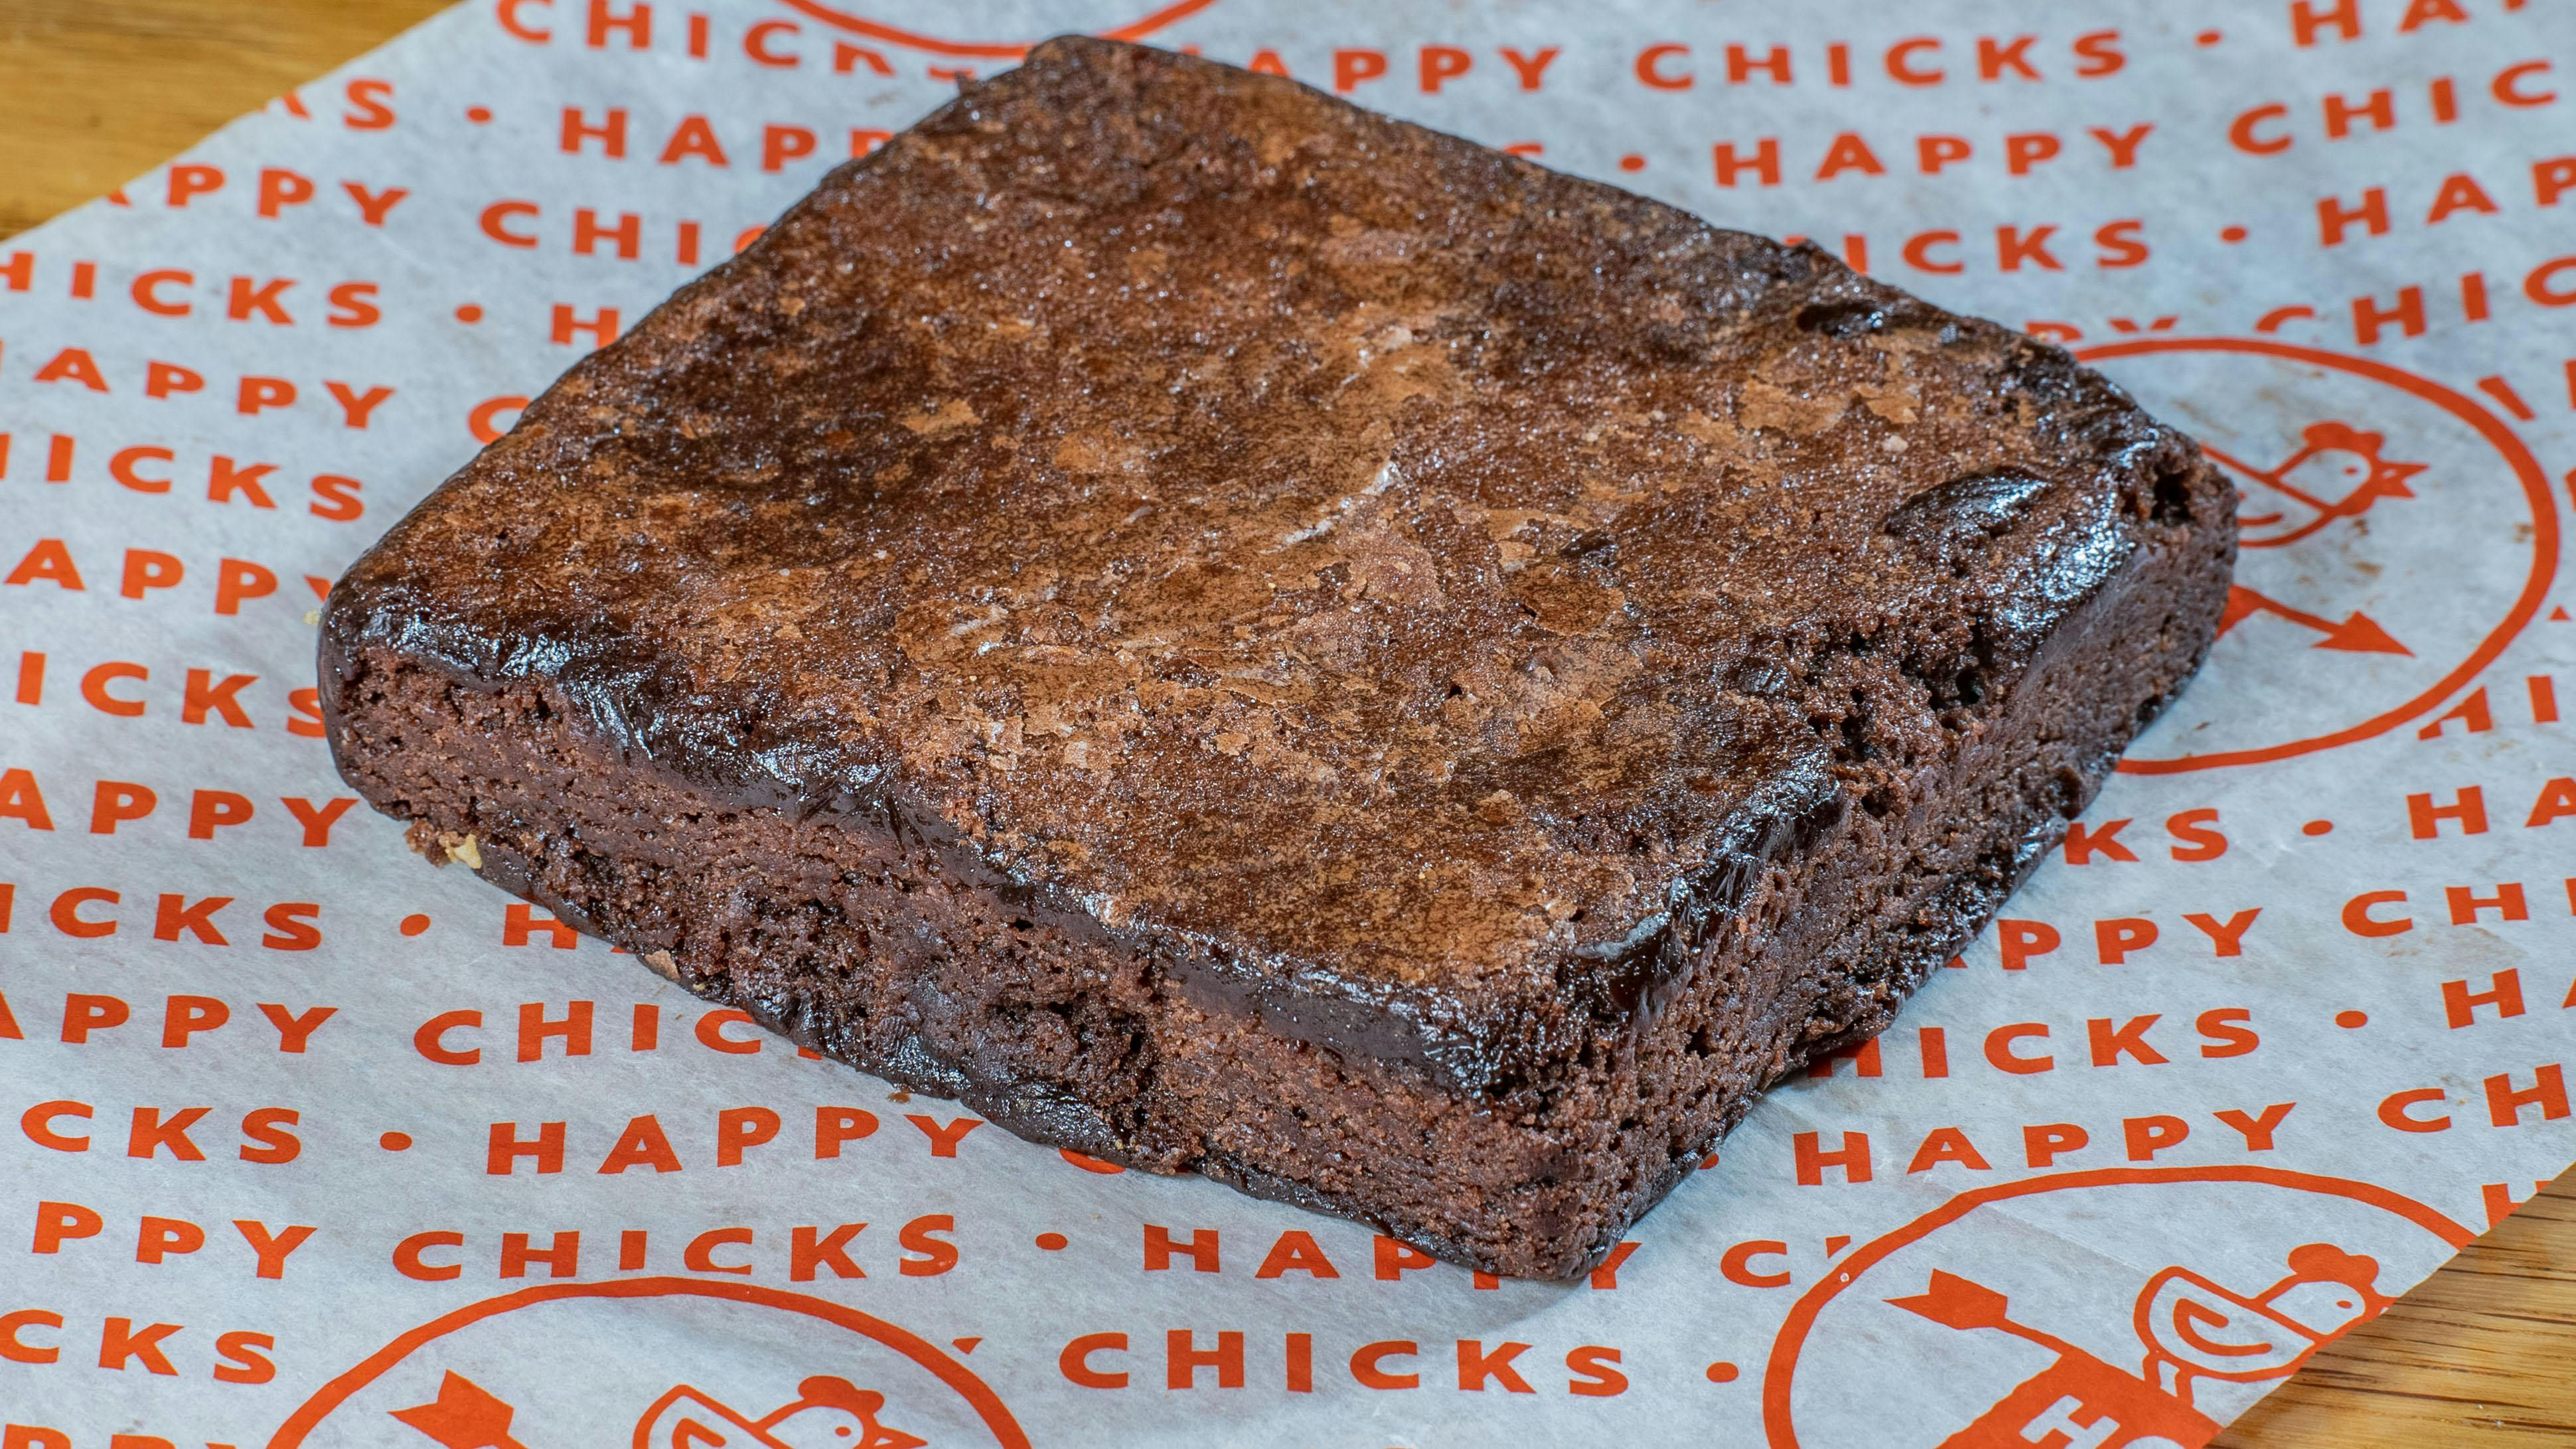 Brownie from Happy Chicks - East 6th St in Austin, TX